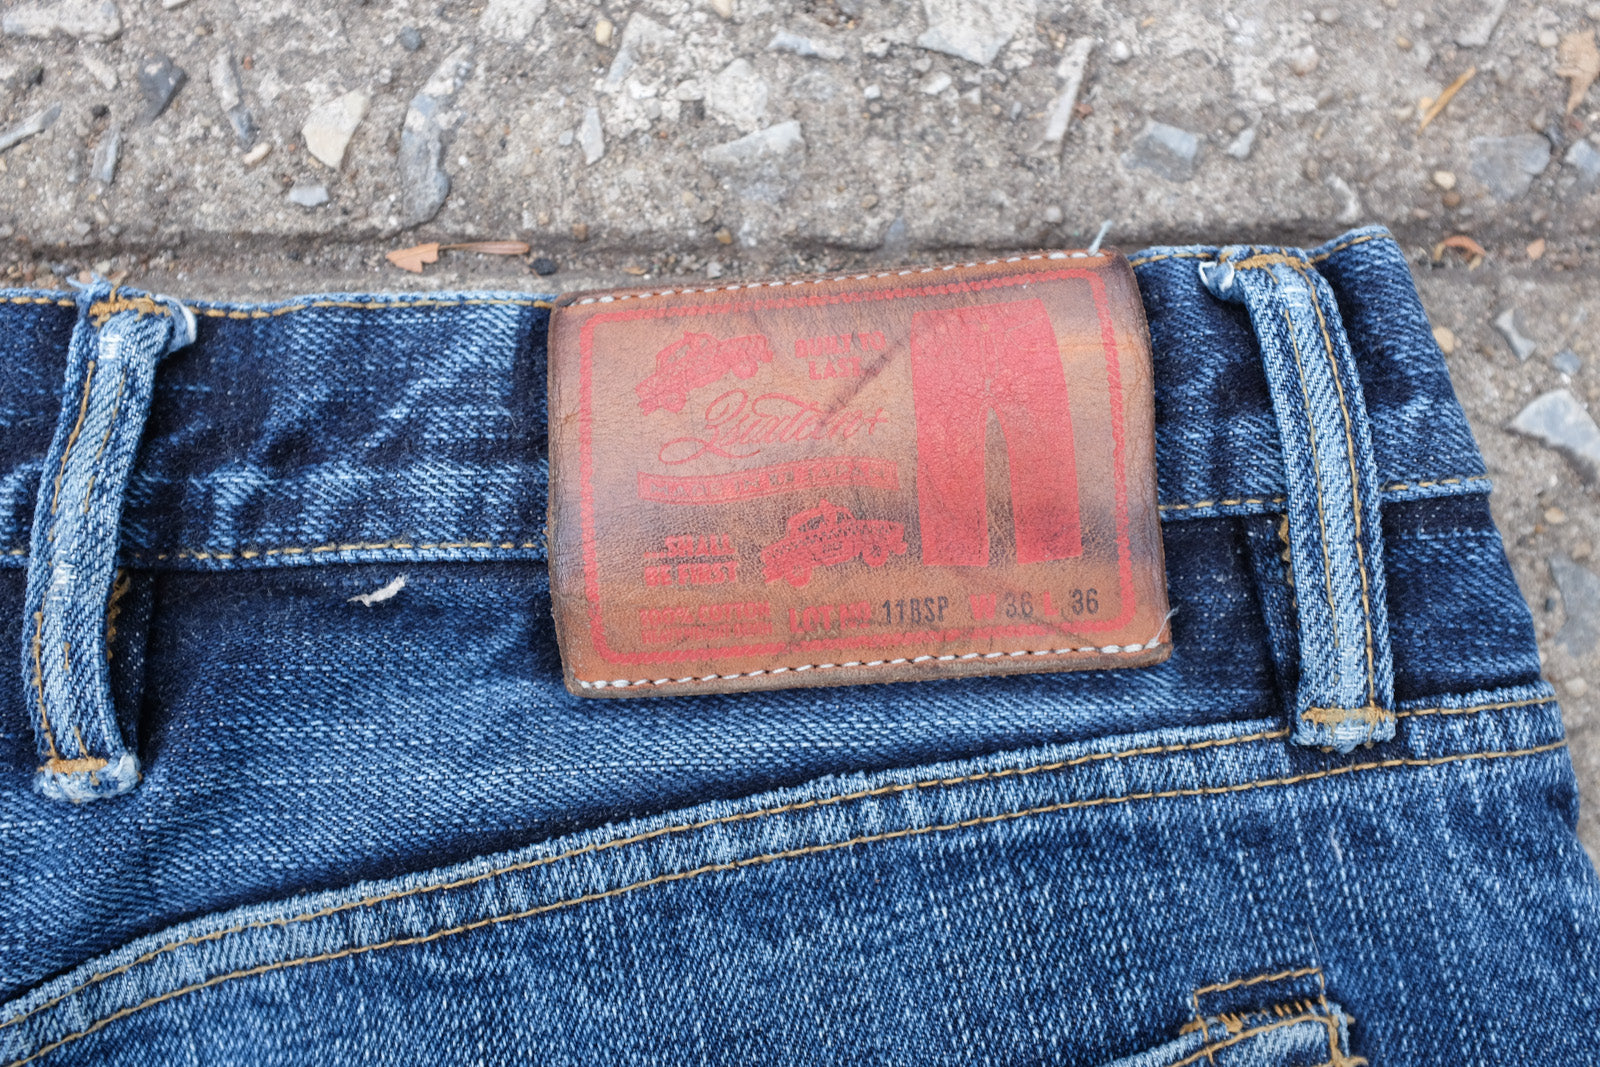 Closeup of 3sixteen 11BSP leather patch showing signs of age.